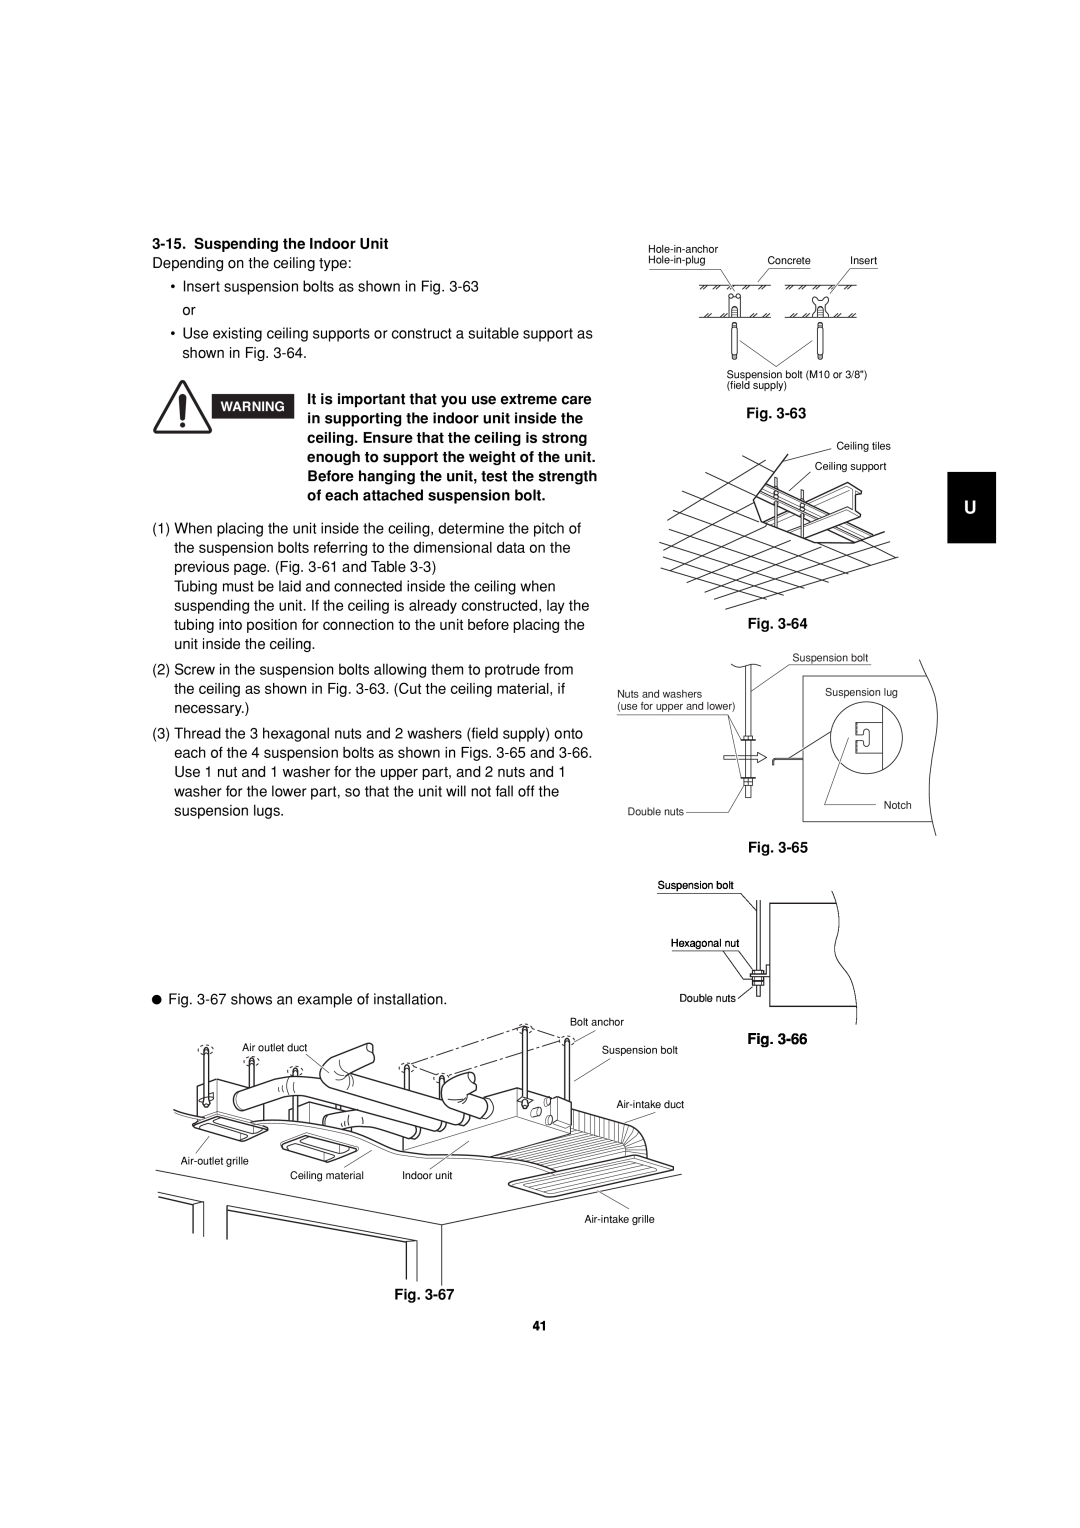 Sanyo 85464359981002 installation instructions Suspending the Indoor Unit, It is important that you use extreme care, Fig 